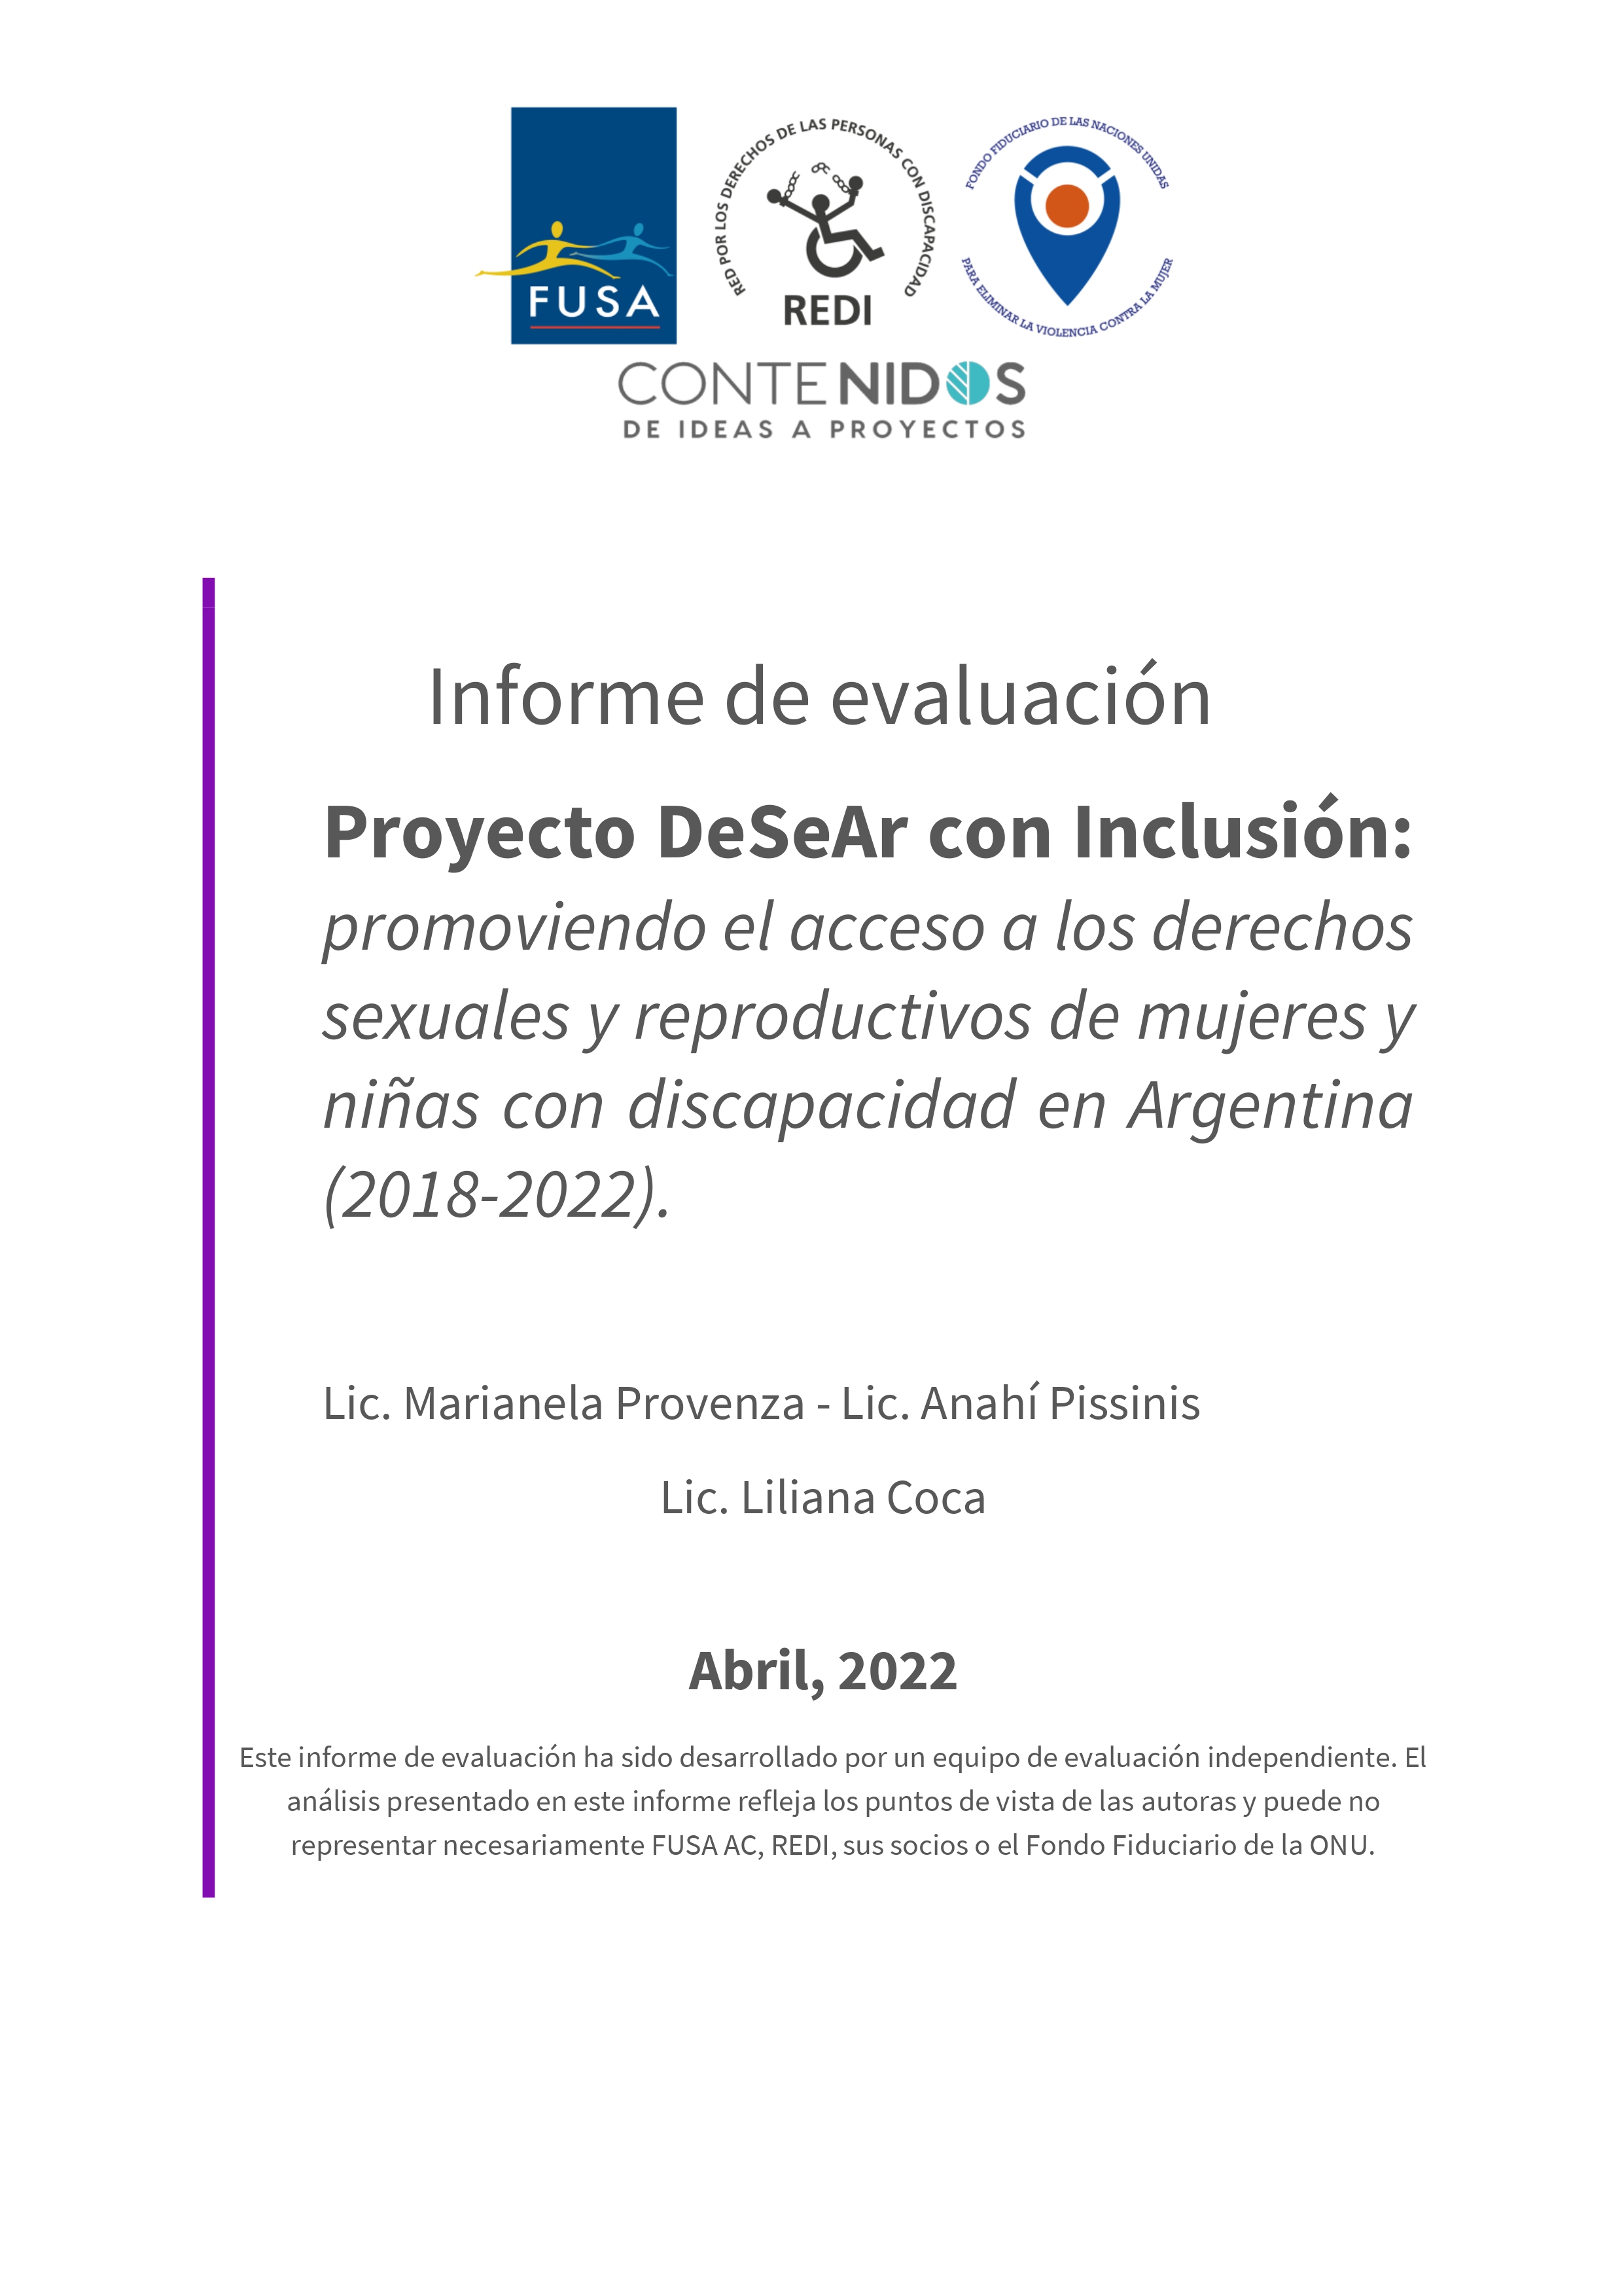 Final Evaluation: DeSeAr Project (Sexual Rights in Argentina) with Inclusion: Promoting Access to Sexual and Reproductive Rights for Women and Girls with Disabilities in Argentina 